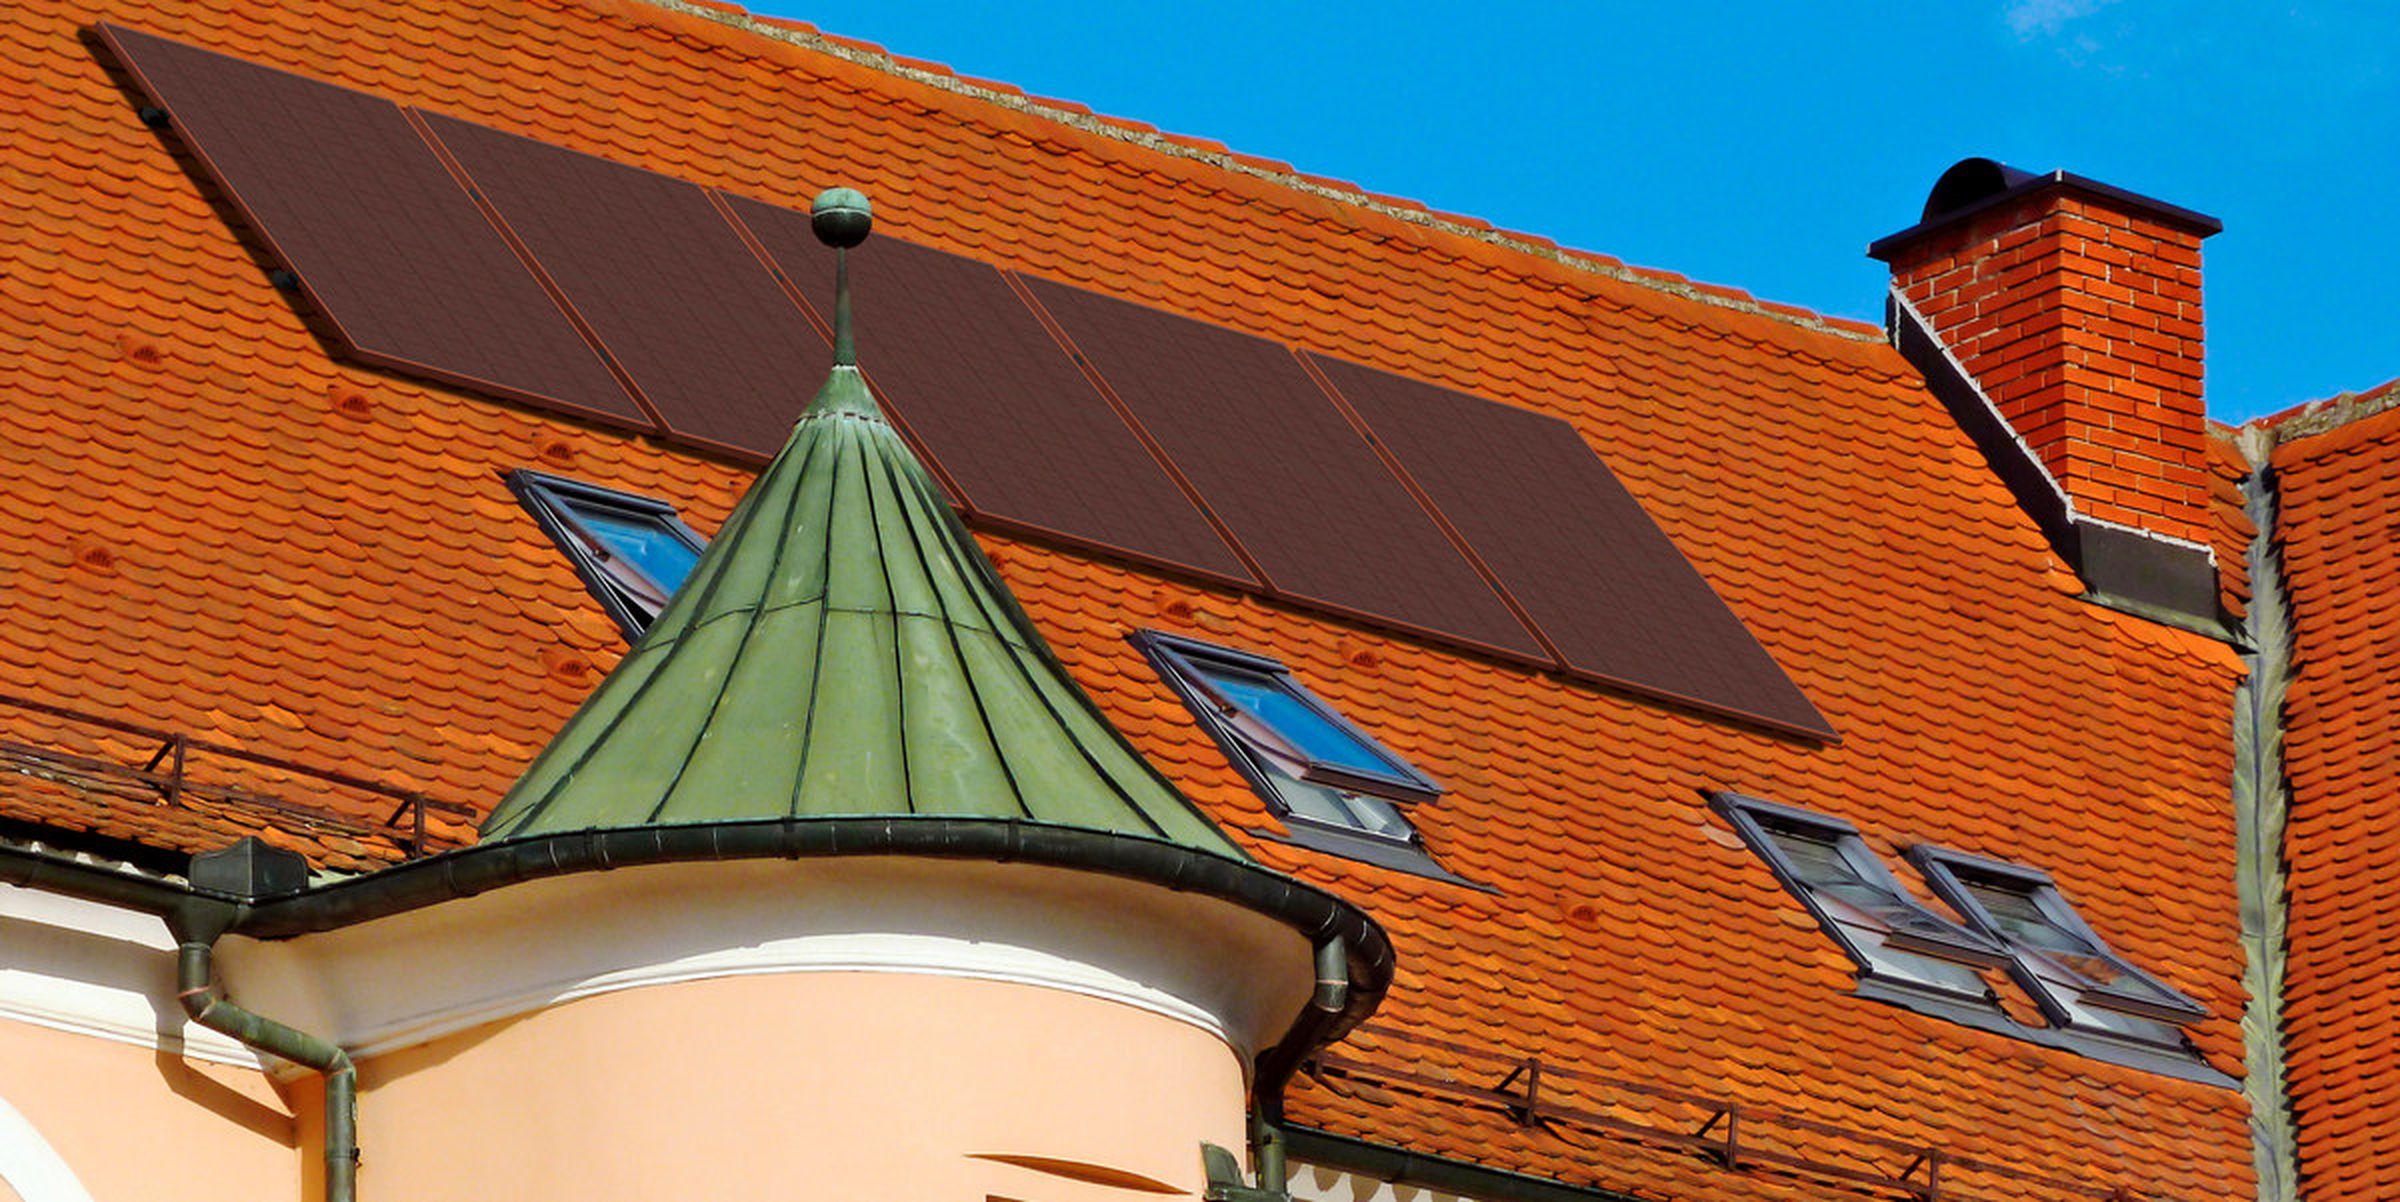 Sonnenkraft’s Terracota solar panels installed on the rooftop of an historic monument.